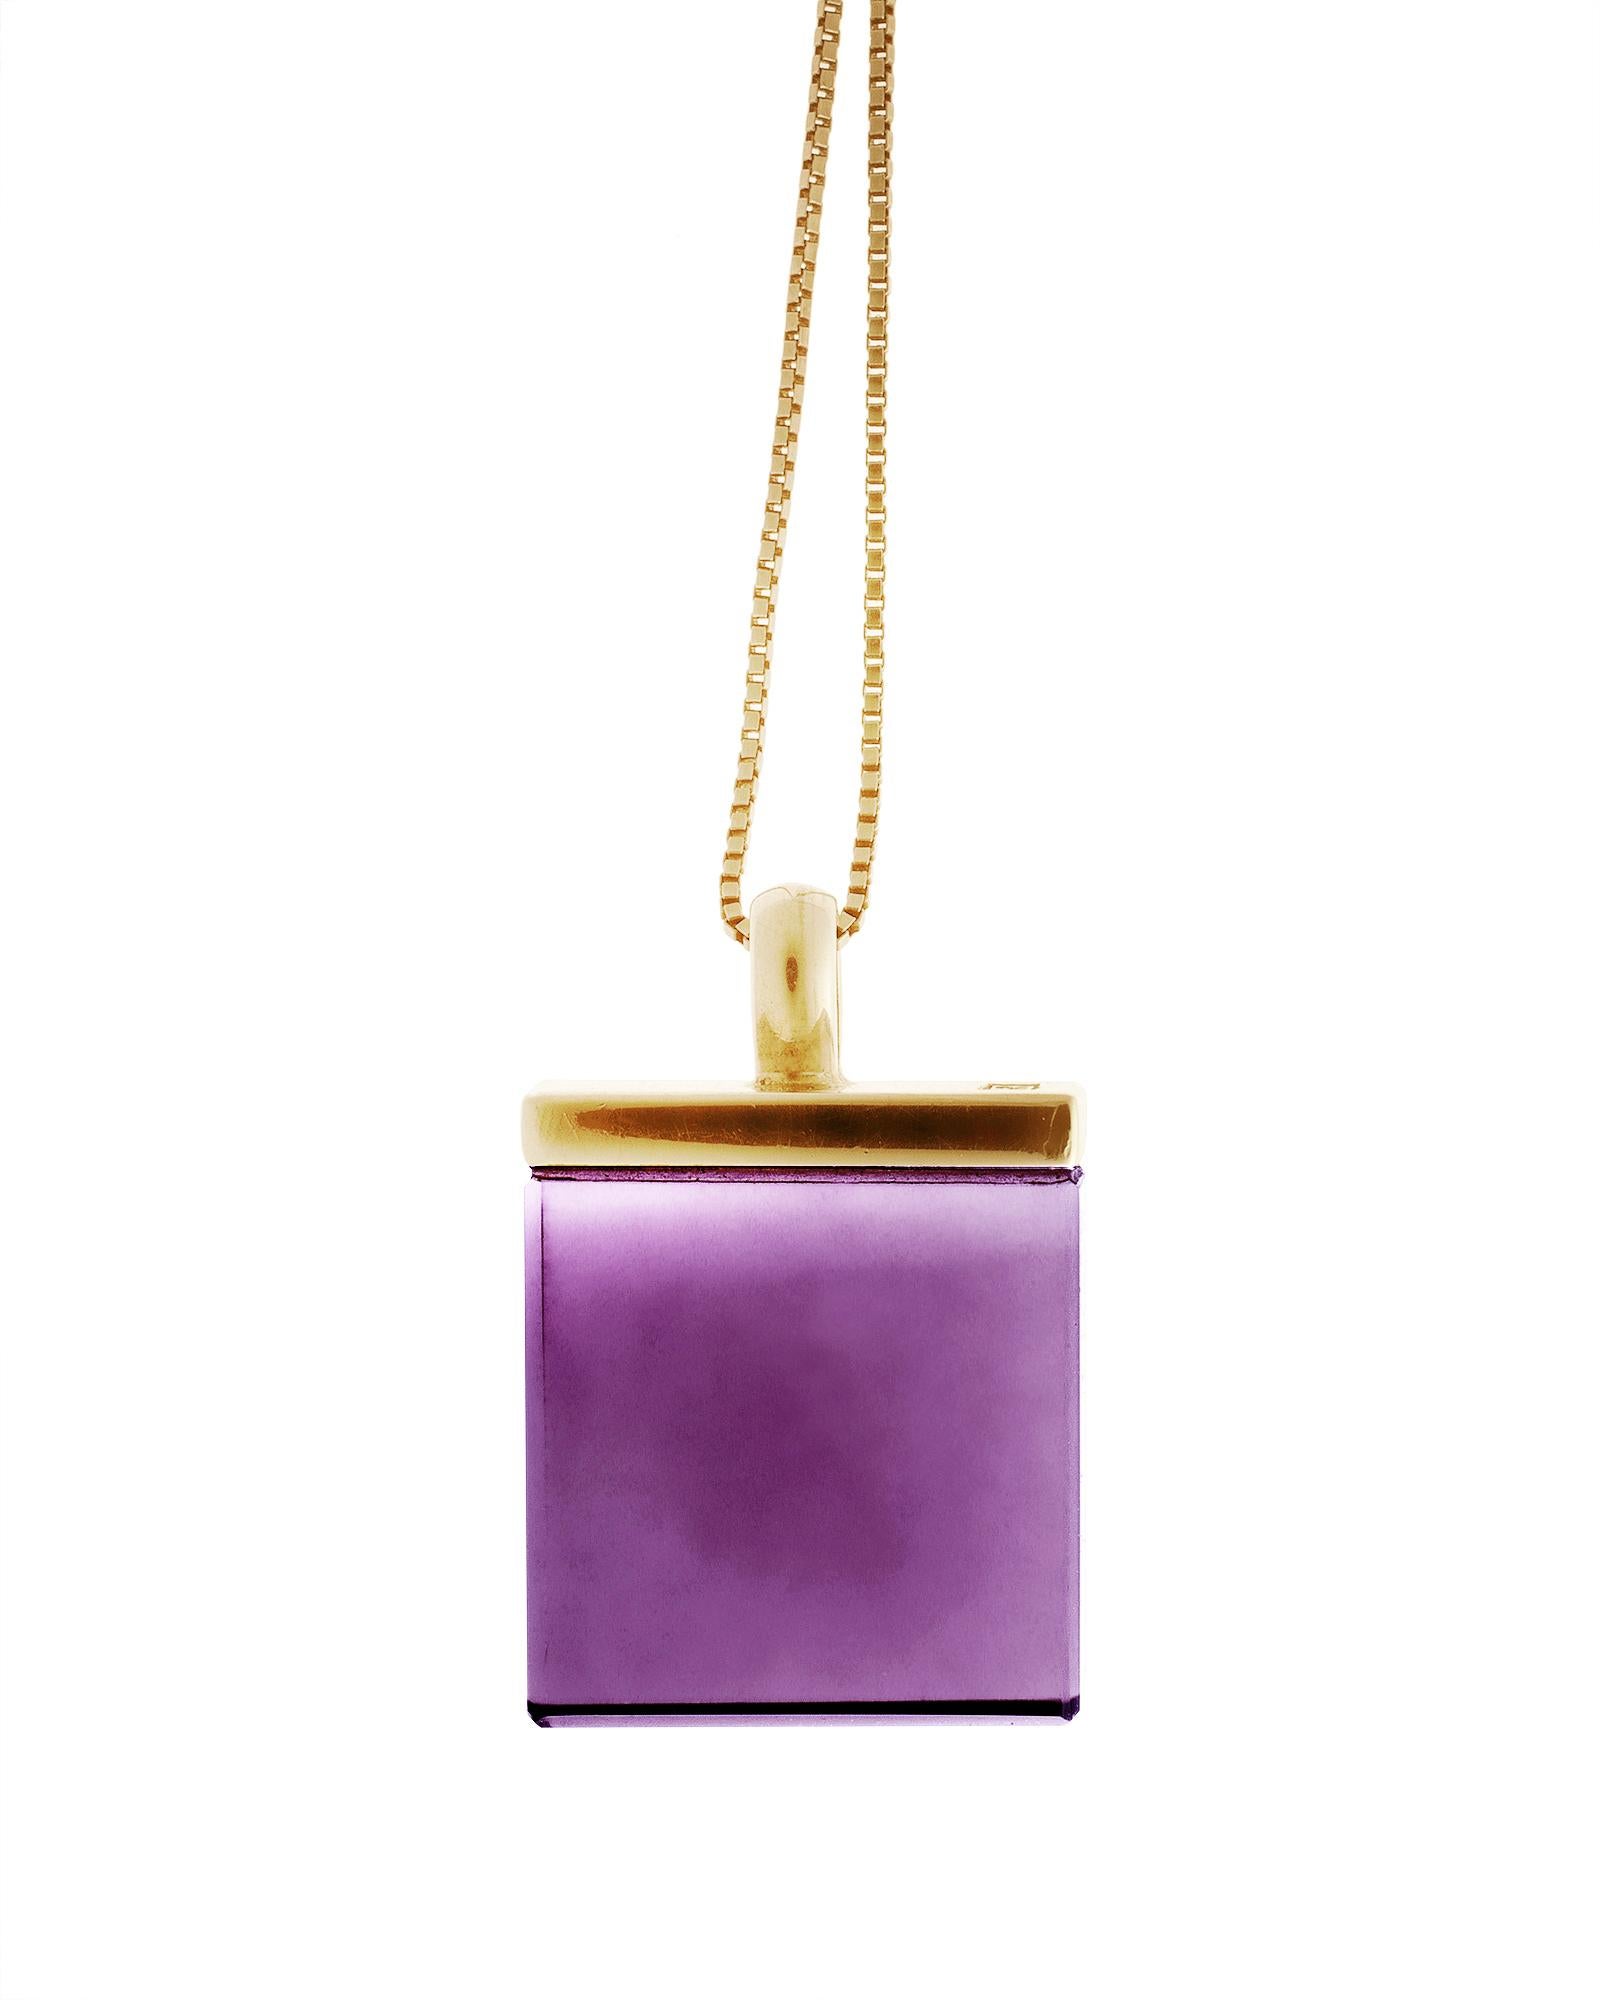 This 18 Karat Yellow Gold pendant necklace features a large 15x15x8 mm vivid grown amethyst, specially cut for the artist. It is part of the Ink collection, which has been featured in publications such as Harper's Bazaar and Vogue UA.

The gemstone